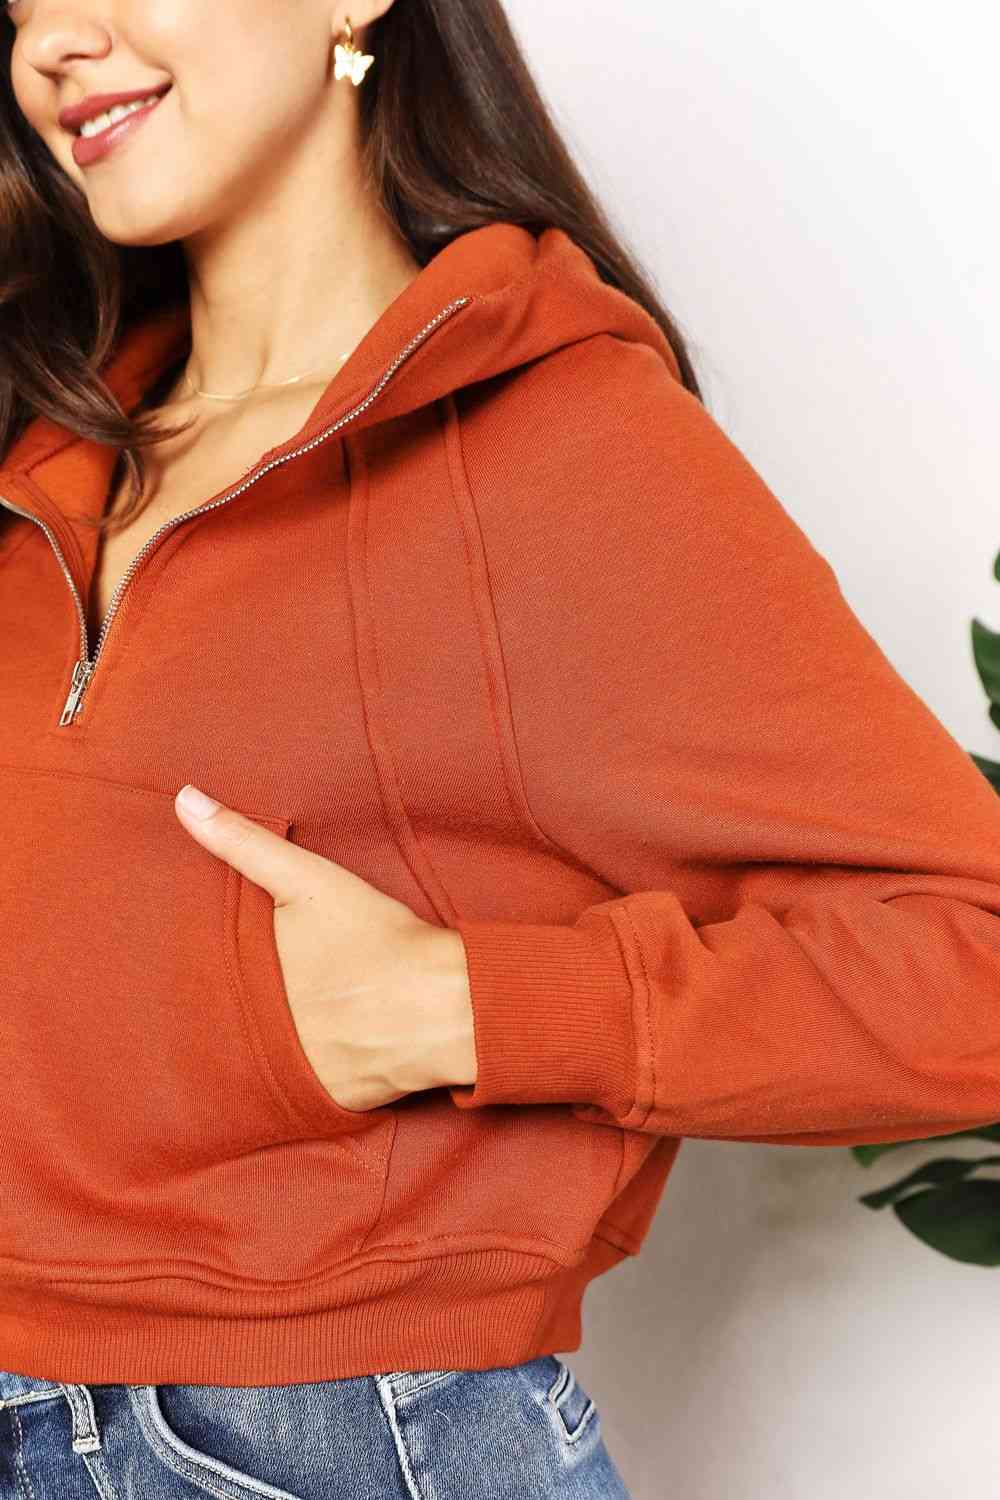 Get trendy with Double Take Half-Zip Long Sleeve Hoodie - Hoodie available at Styles Code. Grab yours today!